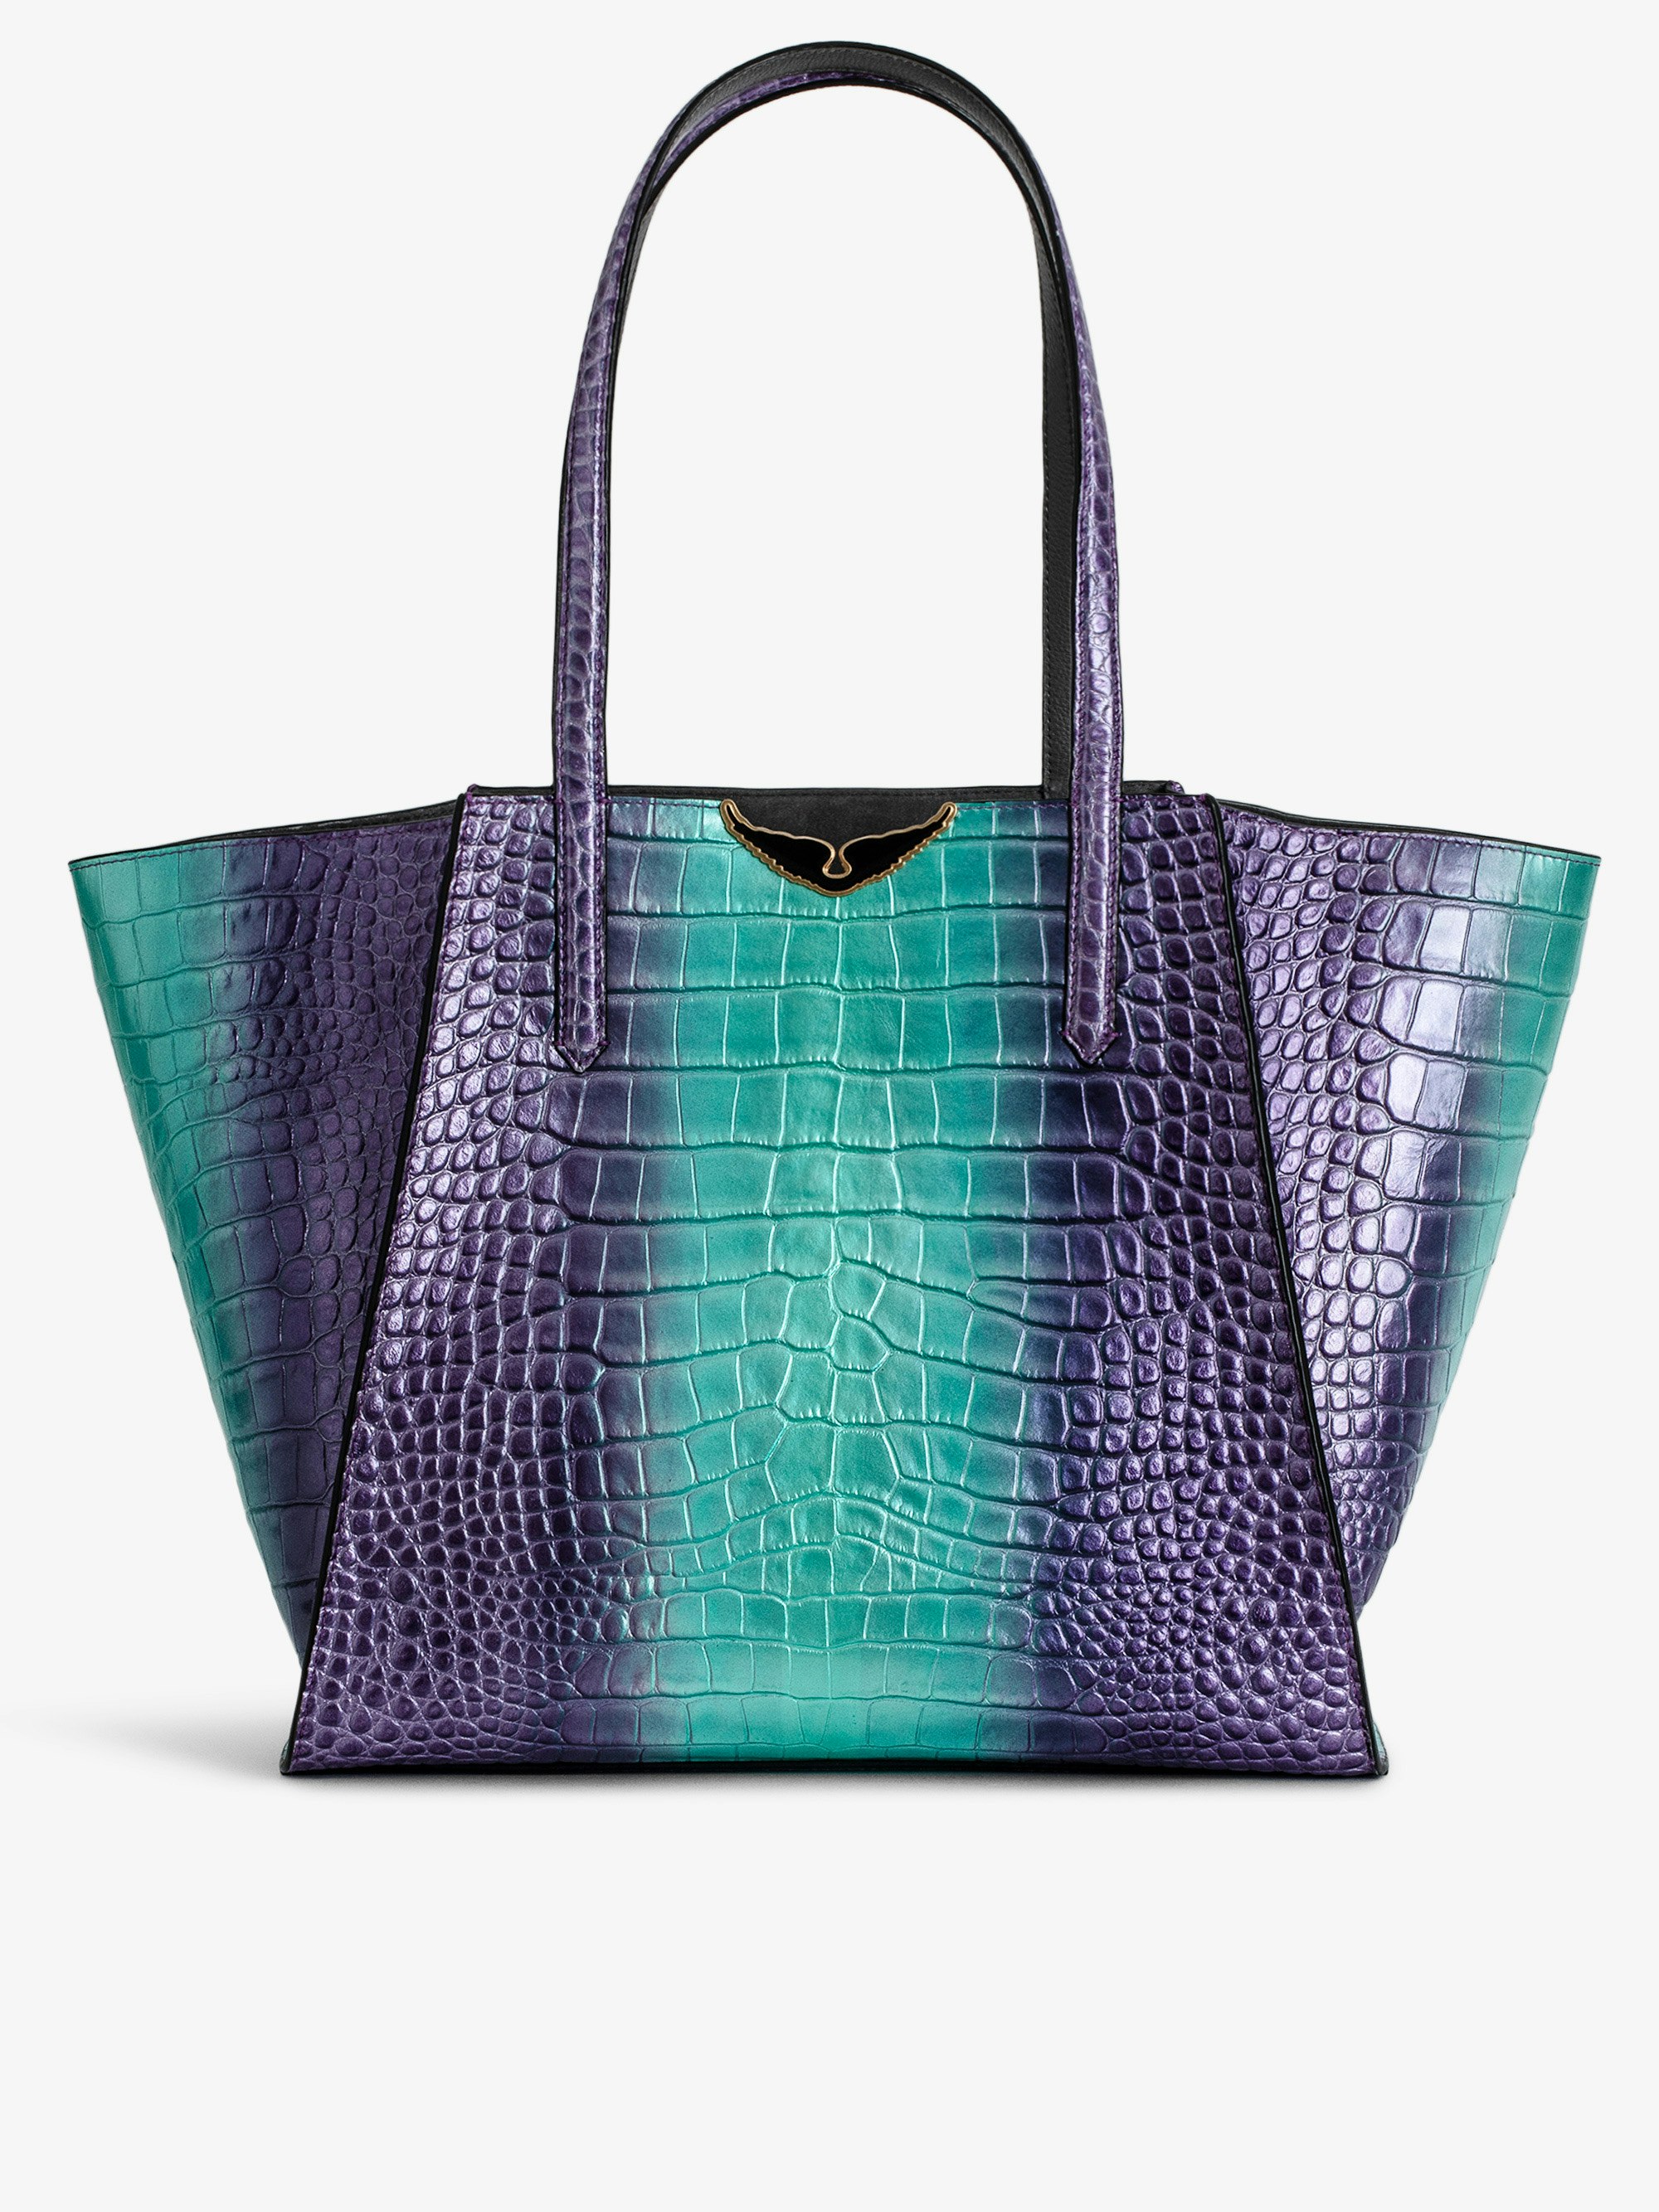 Le Borderline Embossed Metallic Bag - Purple croc-embossed metallic leather tote bag with lacquered handle and wings.